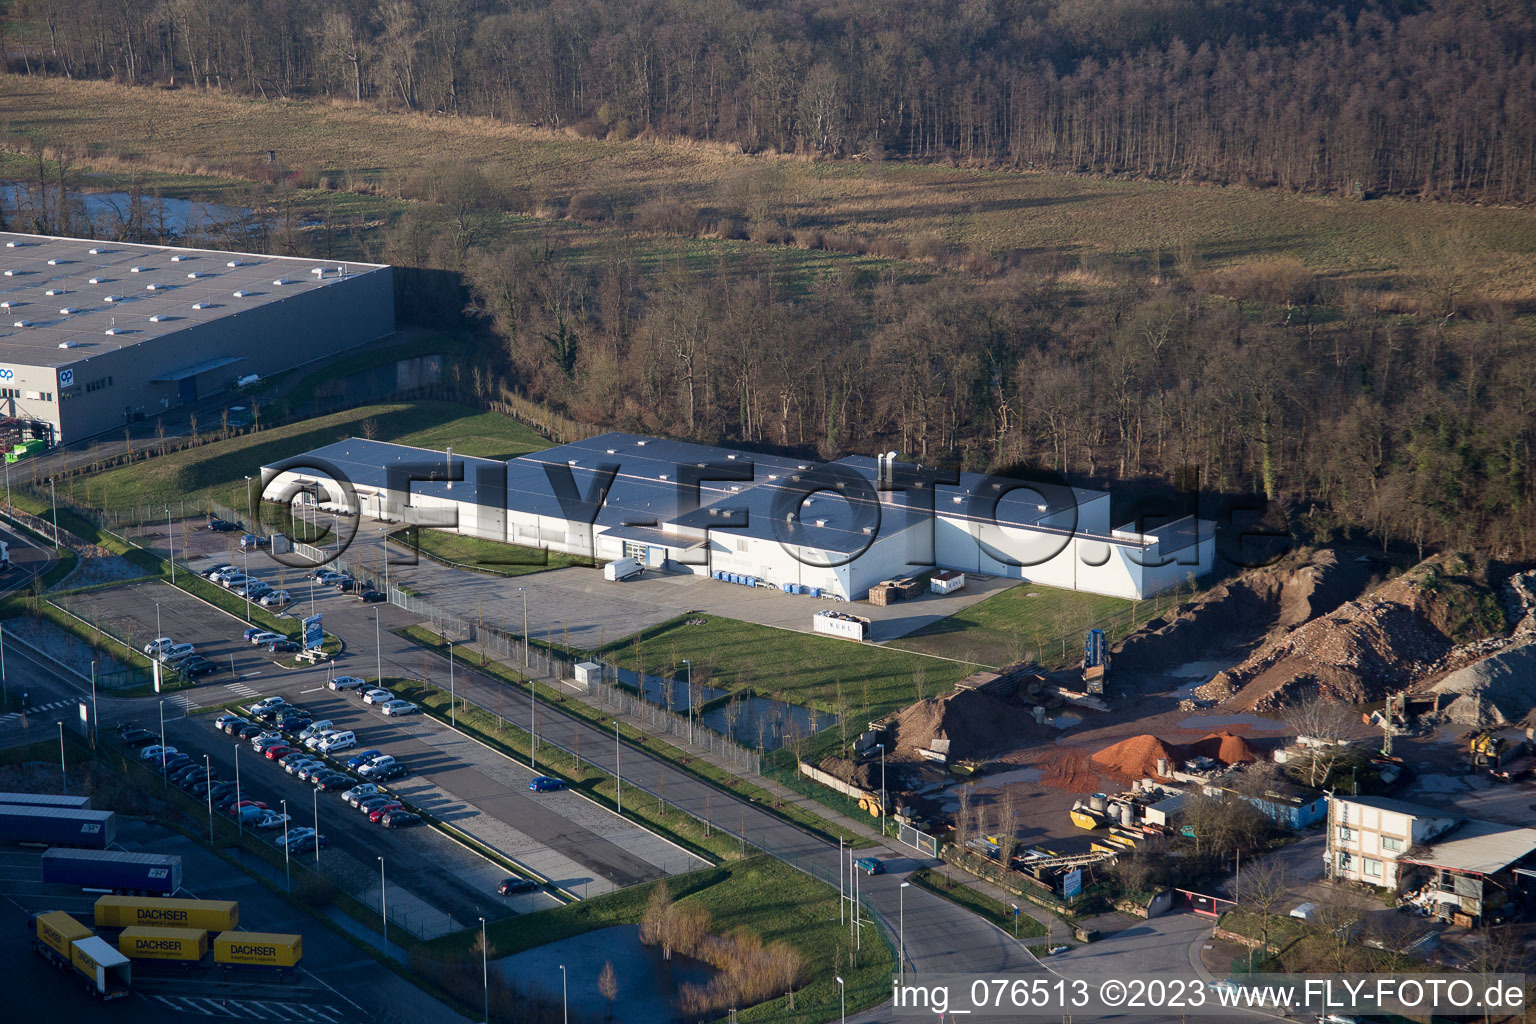 Horst industrial estate, Alfa Aesar GmbH in the district Minderslachen in Kandel in the state Rhineland-Palatinate, Germany from the plane